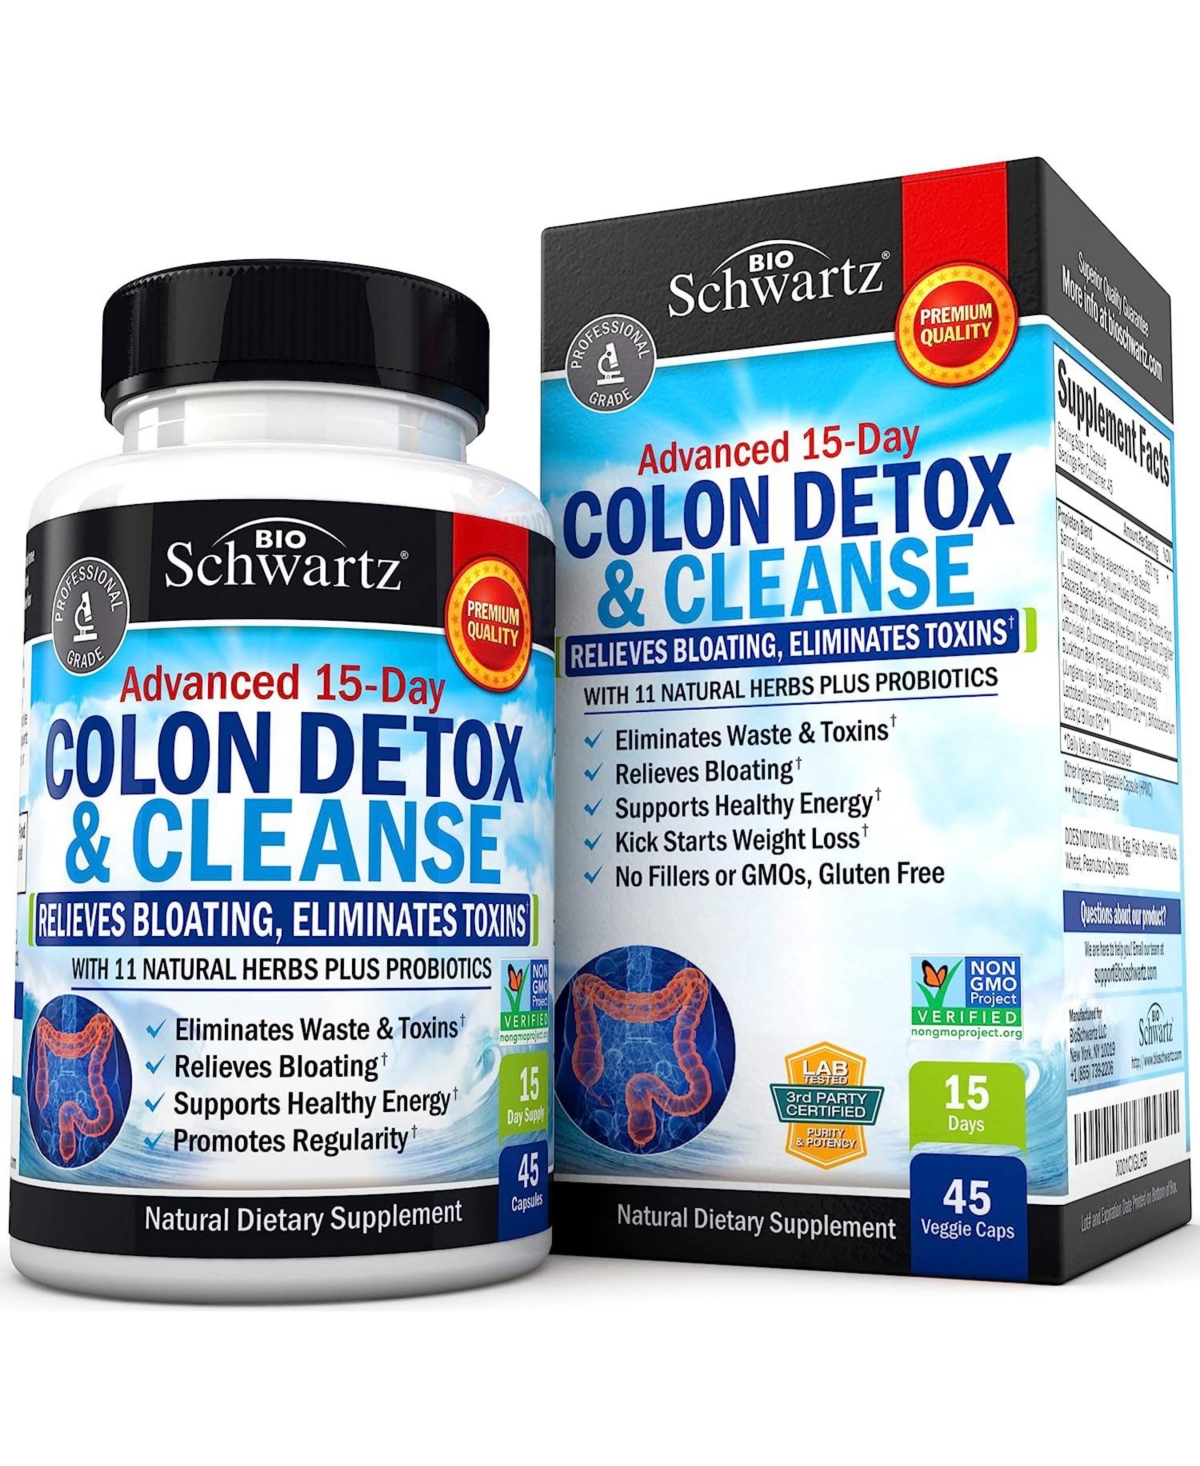 Colon Cleanser & Detox for Weight Loss - 15 Day Fast-Acting Cleanse, Probiotic Fiber, Noni - Constipation Relief, 45 Count